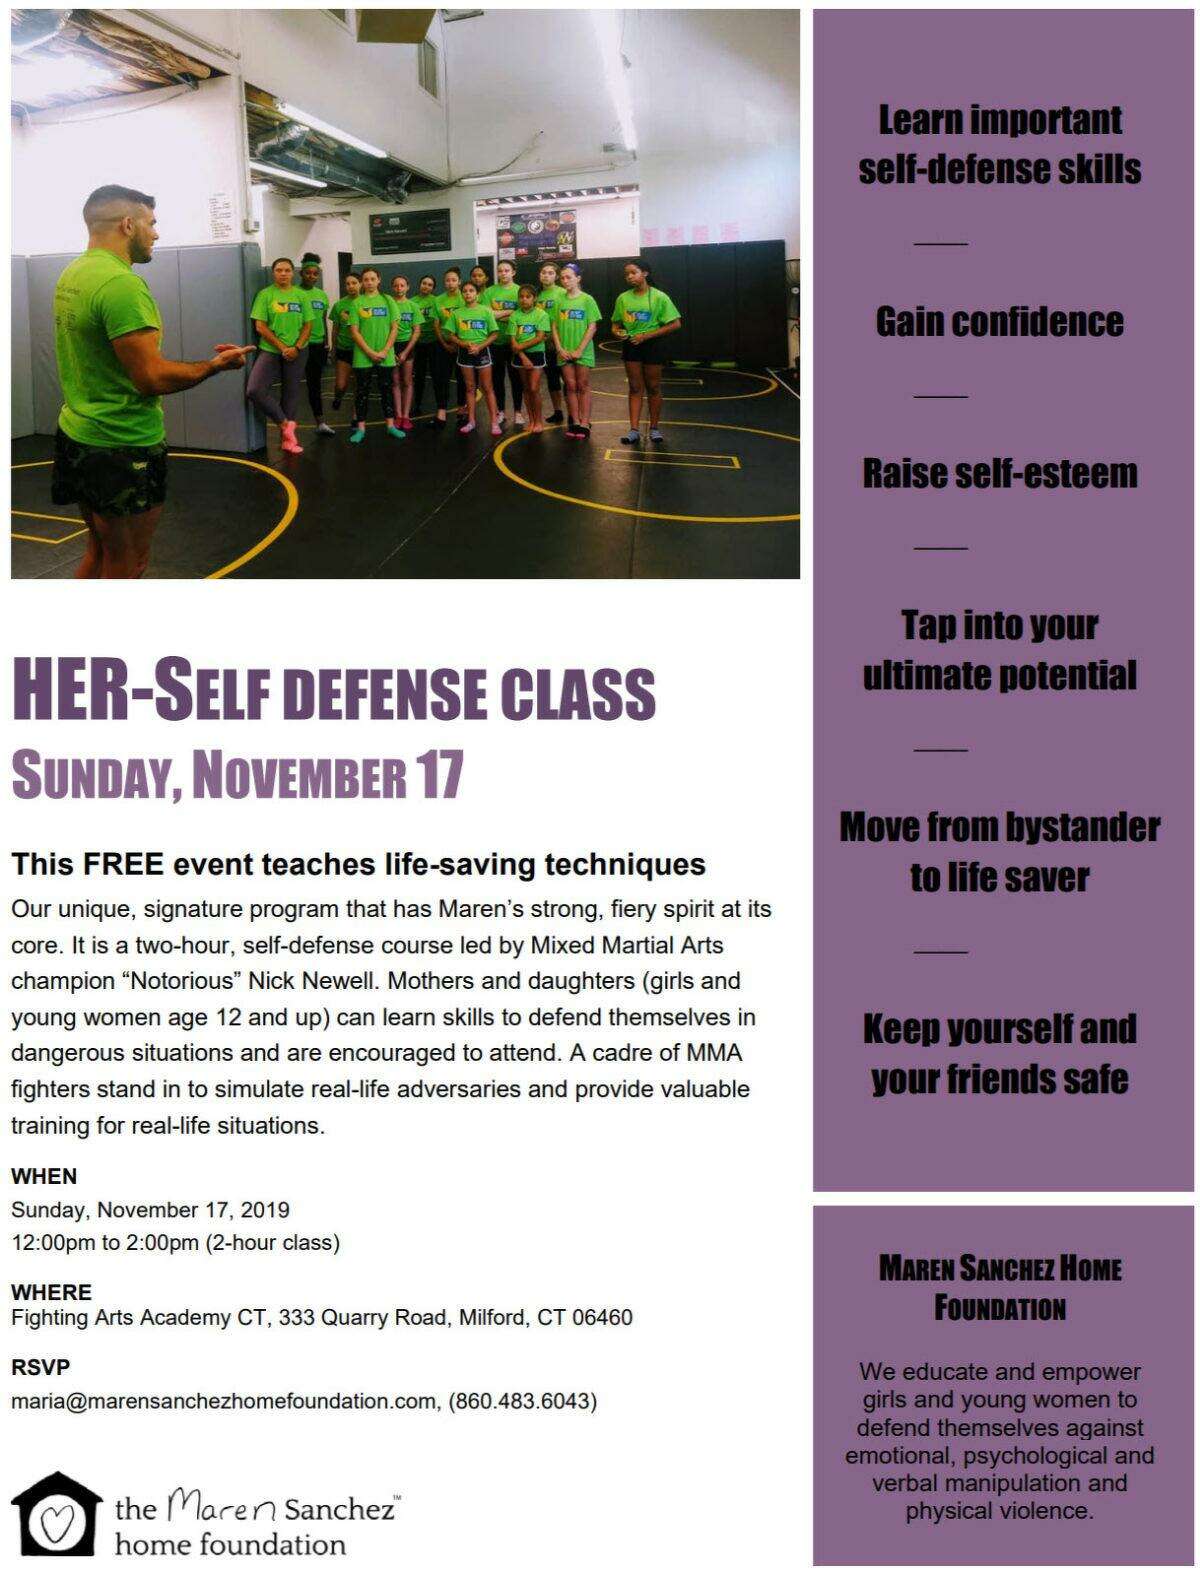 The Maren Sanchez Home Foundation presents HERself Defense class on Sunday, Nov. 17, from noon-2 p.m., at Fighting Arts Academy, Milford.